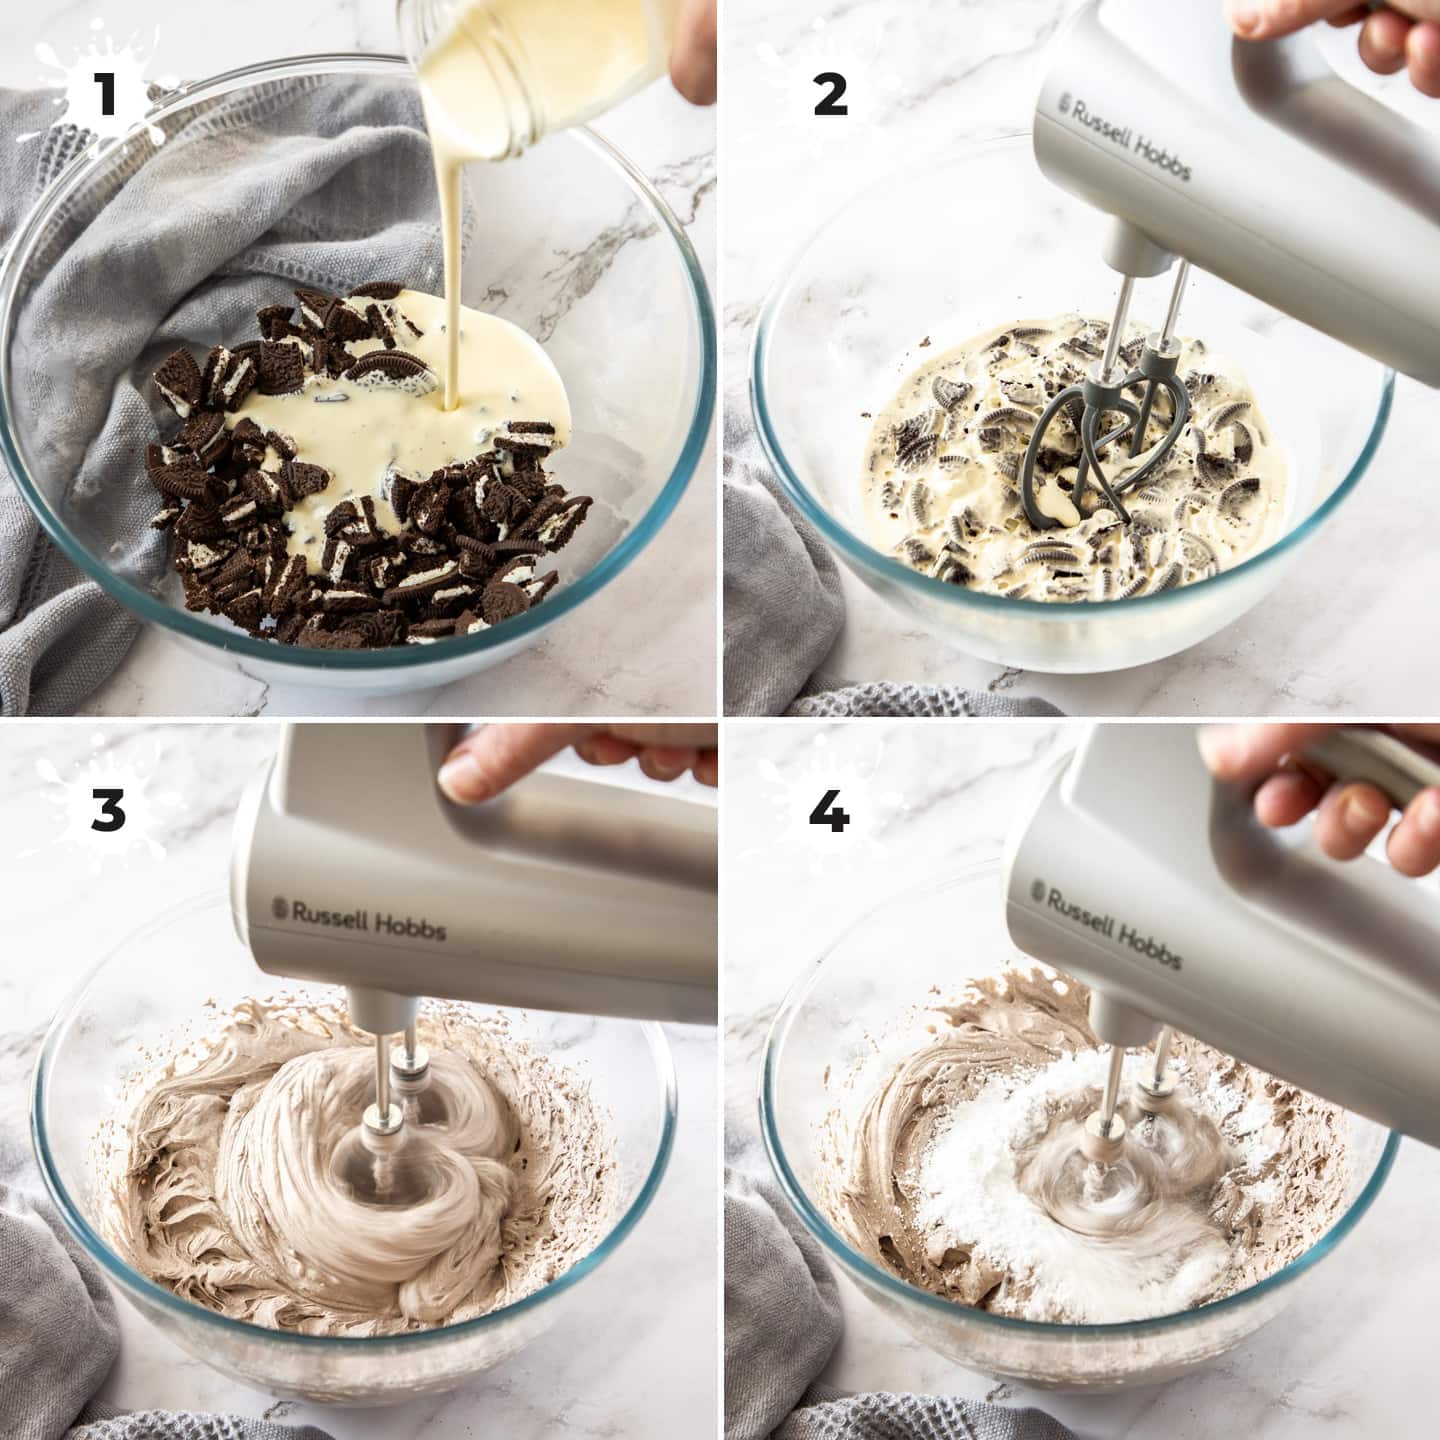 4 images showing mixing cream and oreos in a bowl